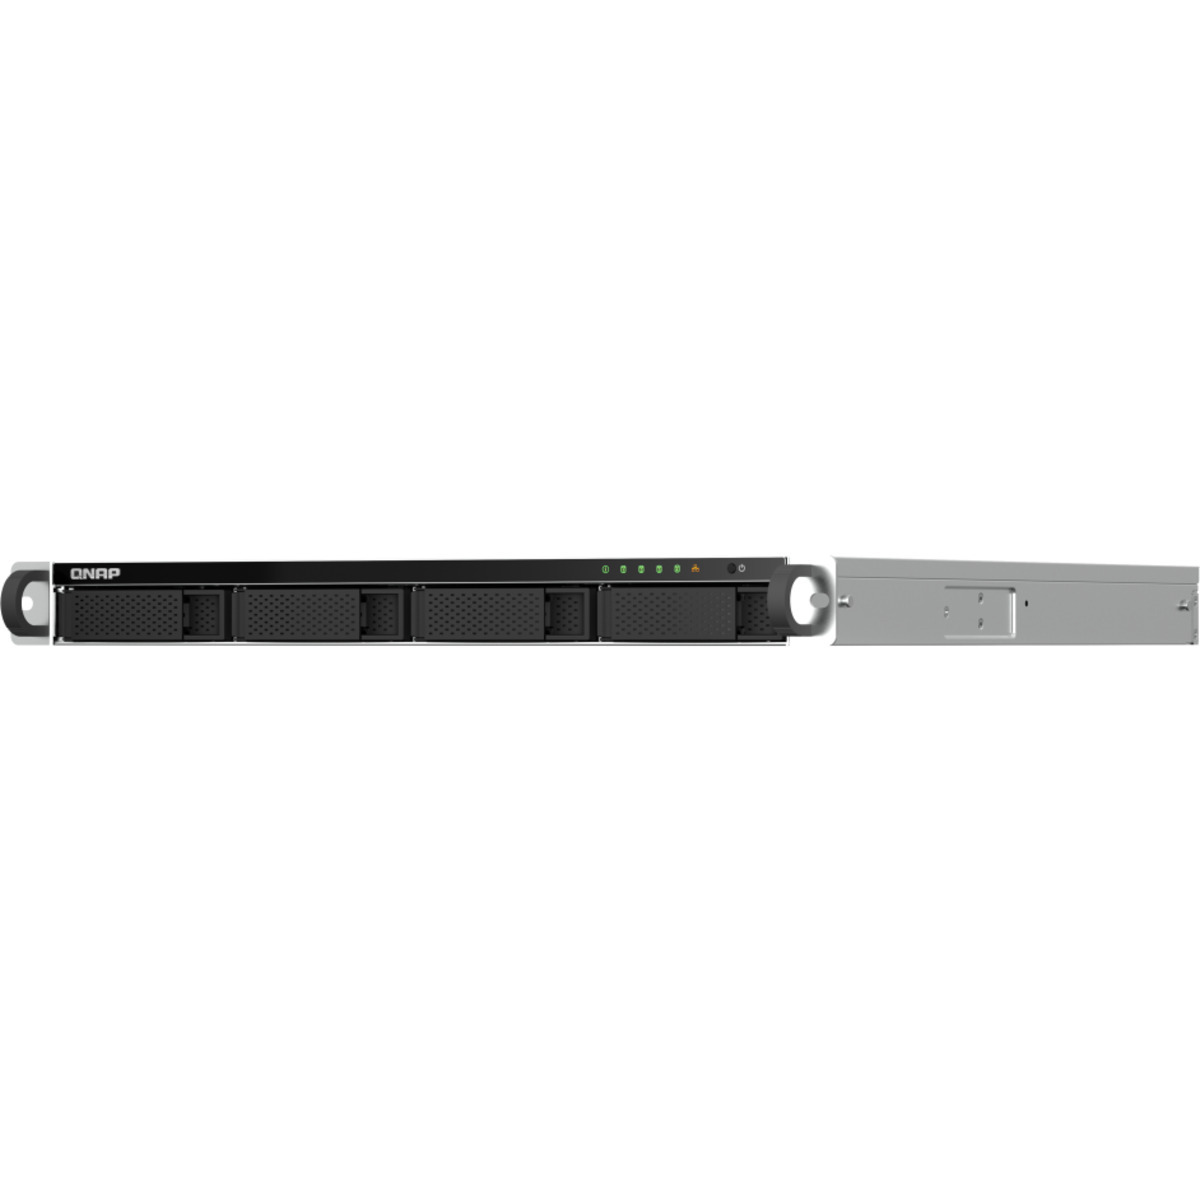 QNAP TS-464U-RP 54tb 4-Bay RackMount Multimedia / Power User / Business NAS - Network Attached Storage Device 3x18tb Seagate IronWolf Pro ST18000NT001 3.5 7200rpm SATA 6Gb/s HDD NAS Class Drives Installed - Burn-In Tested TS-464U-RP